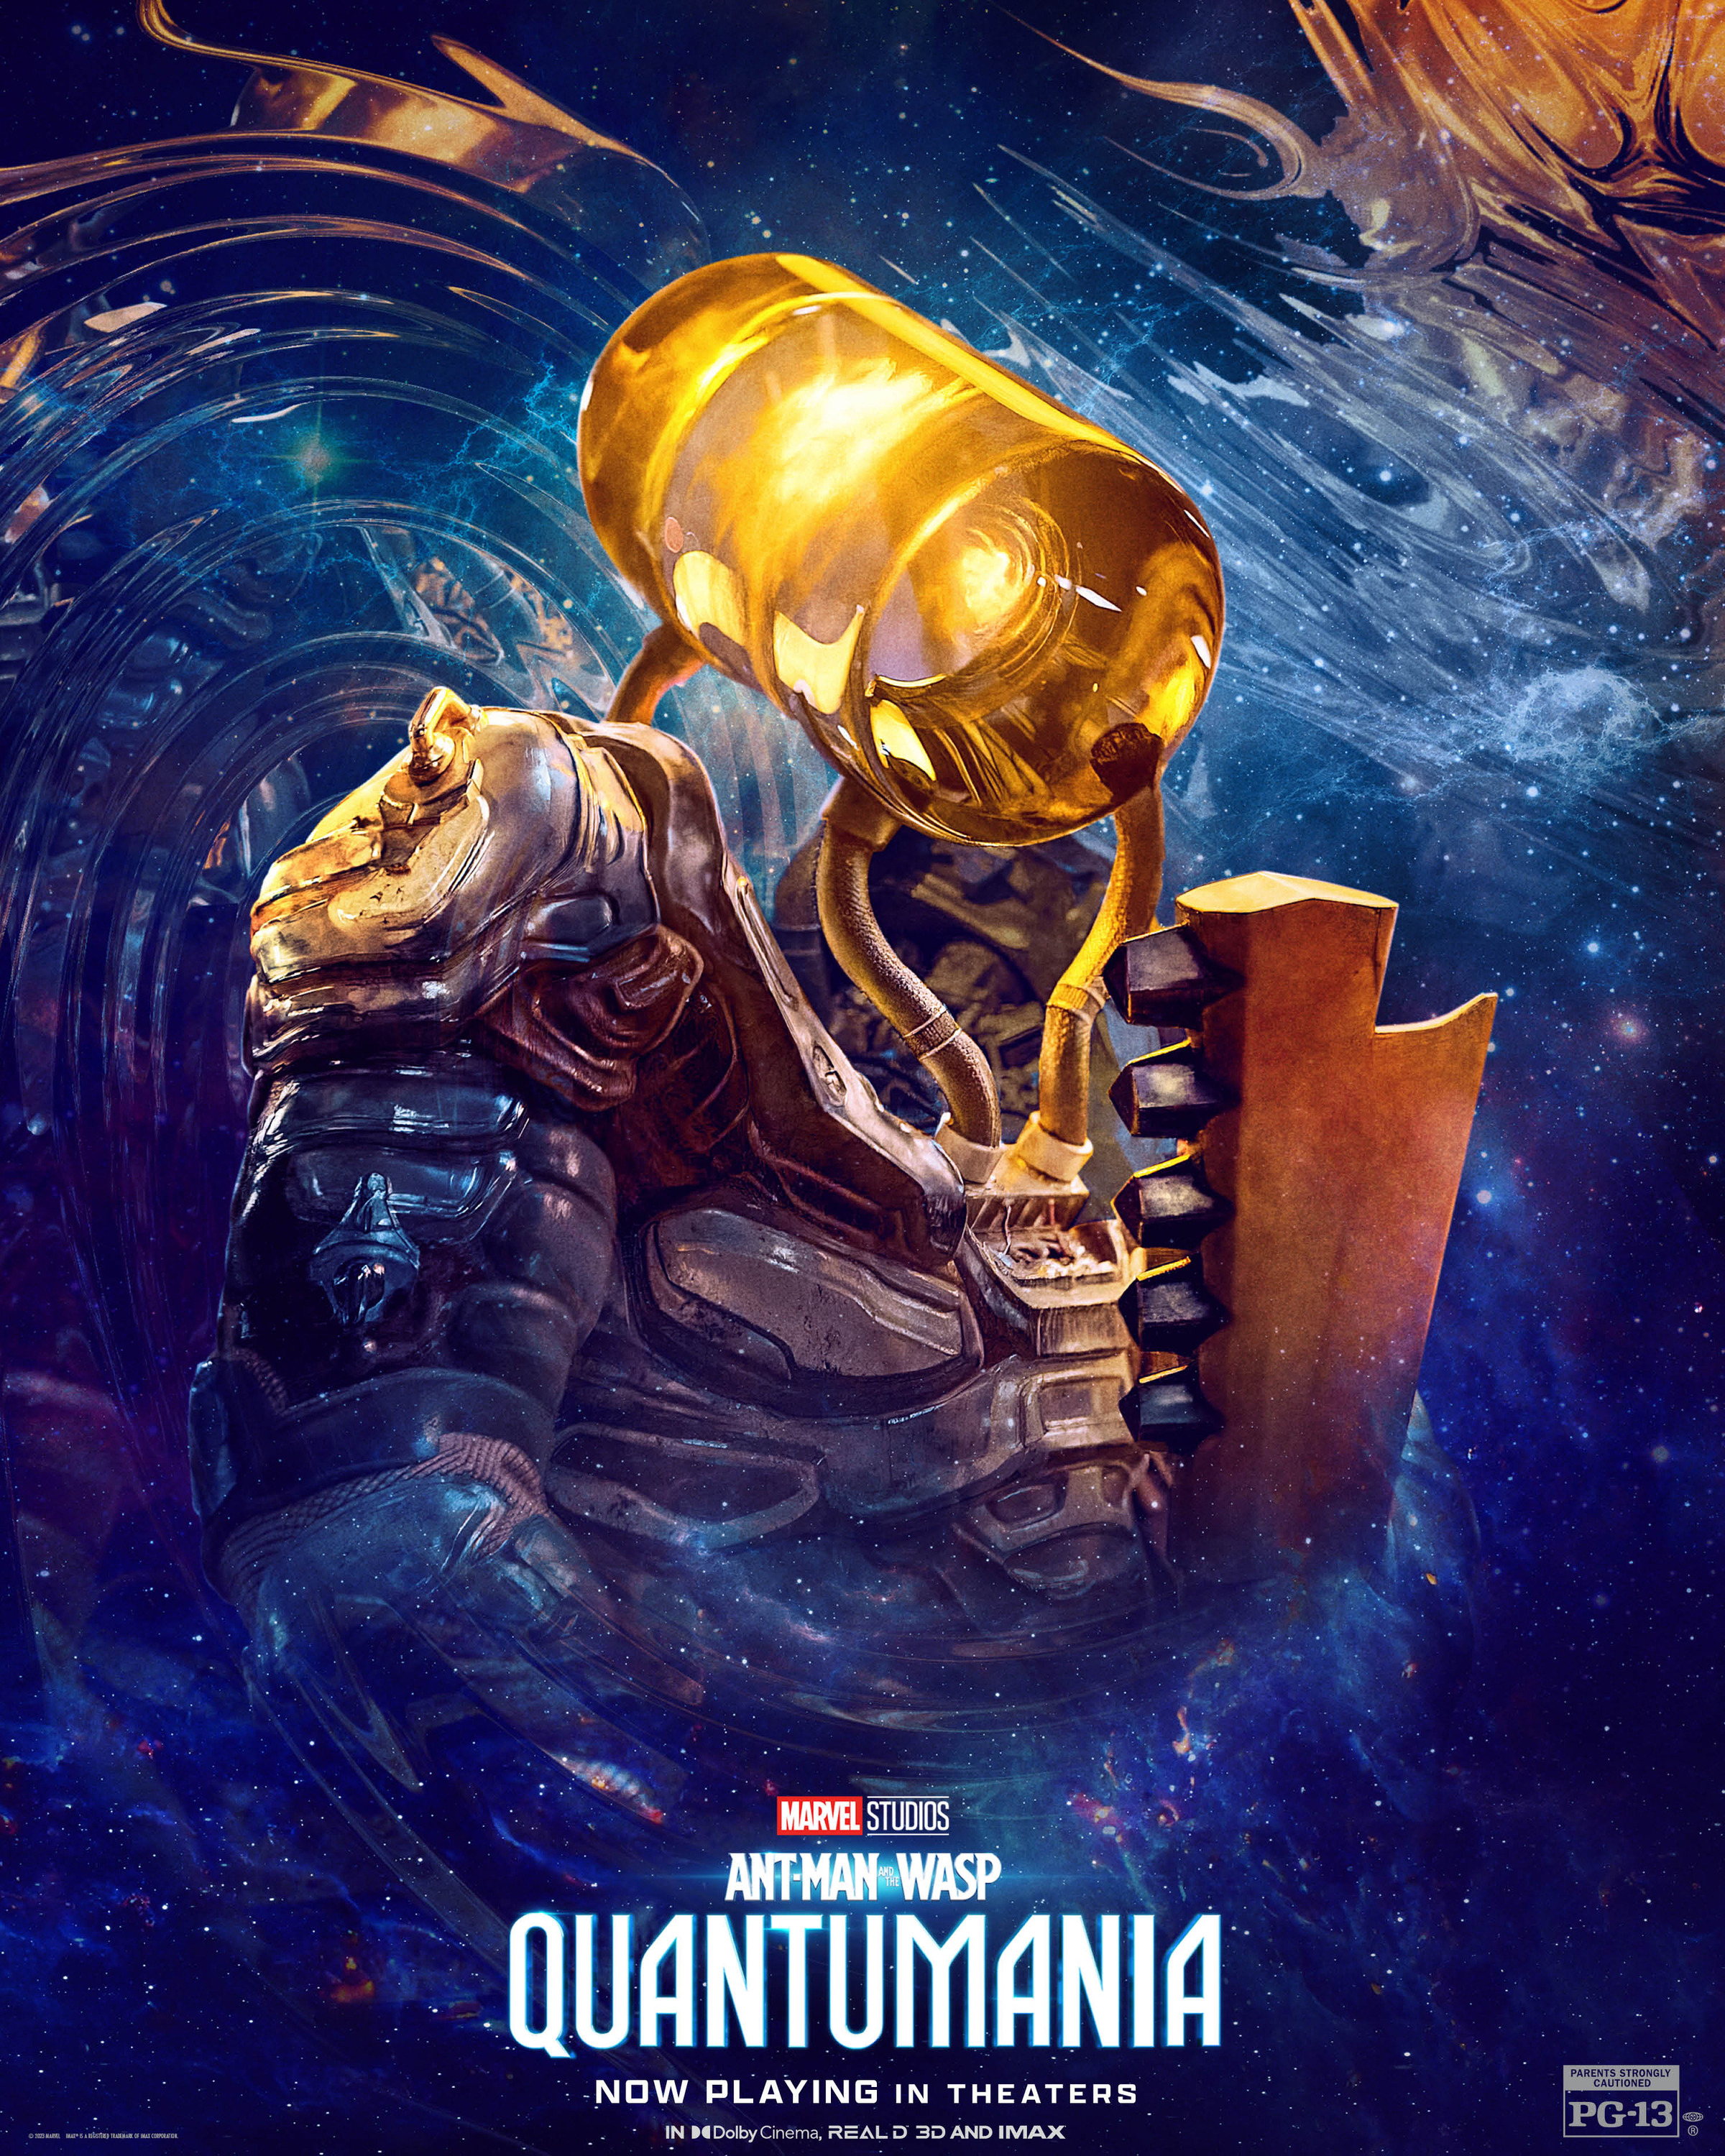 Mega Sized Movie Poster Image for Ant-Man and the Wasp: Quantumania (#26 of 27)